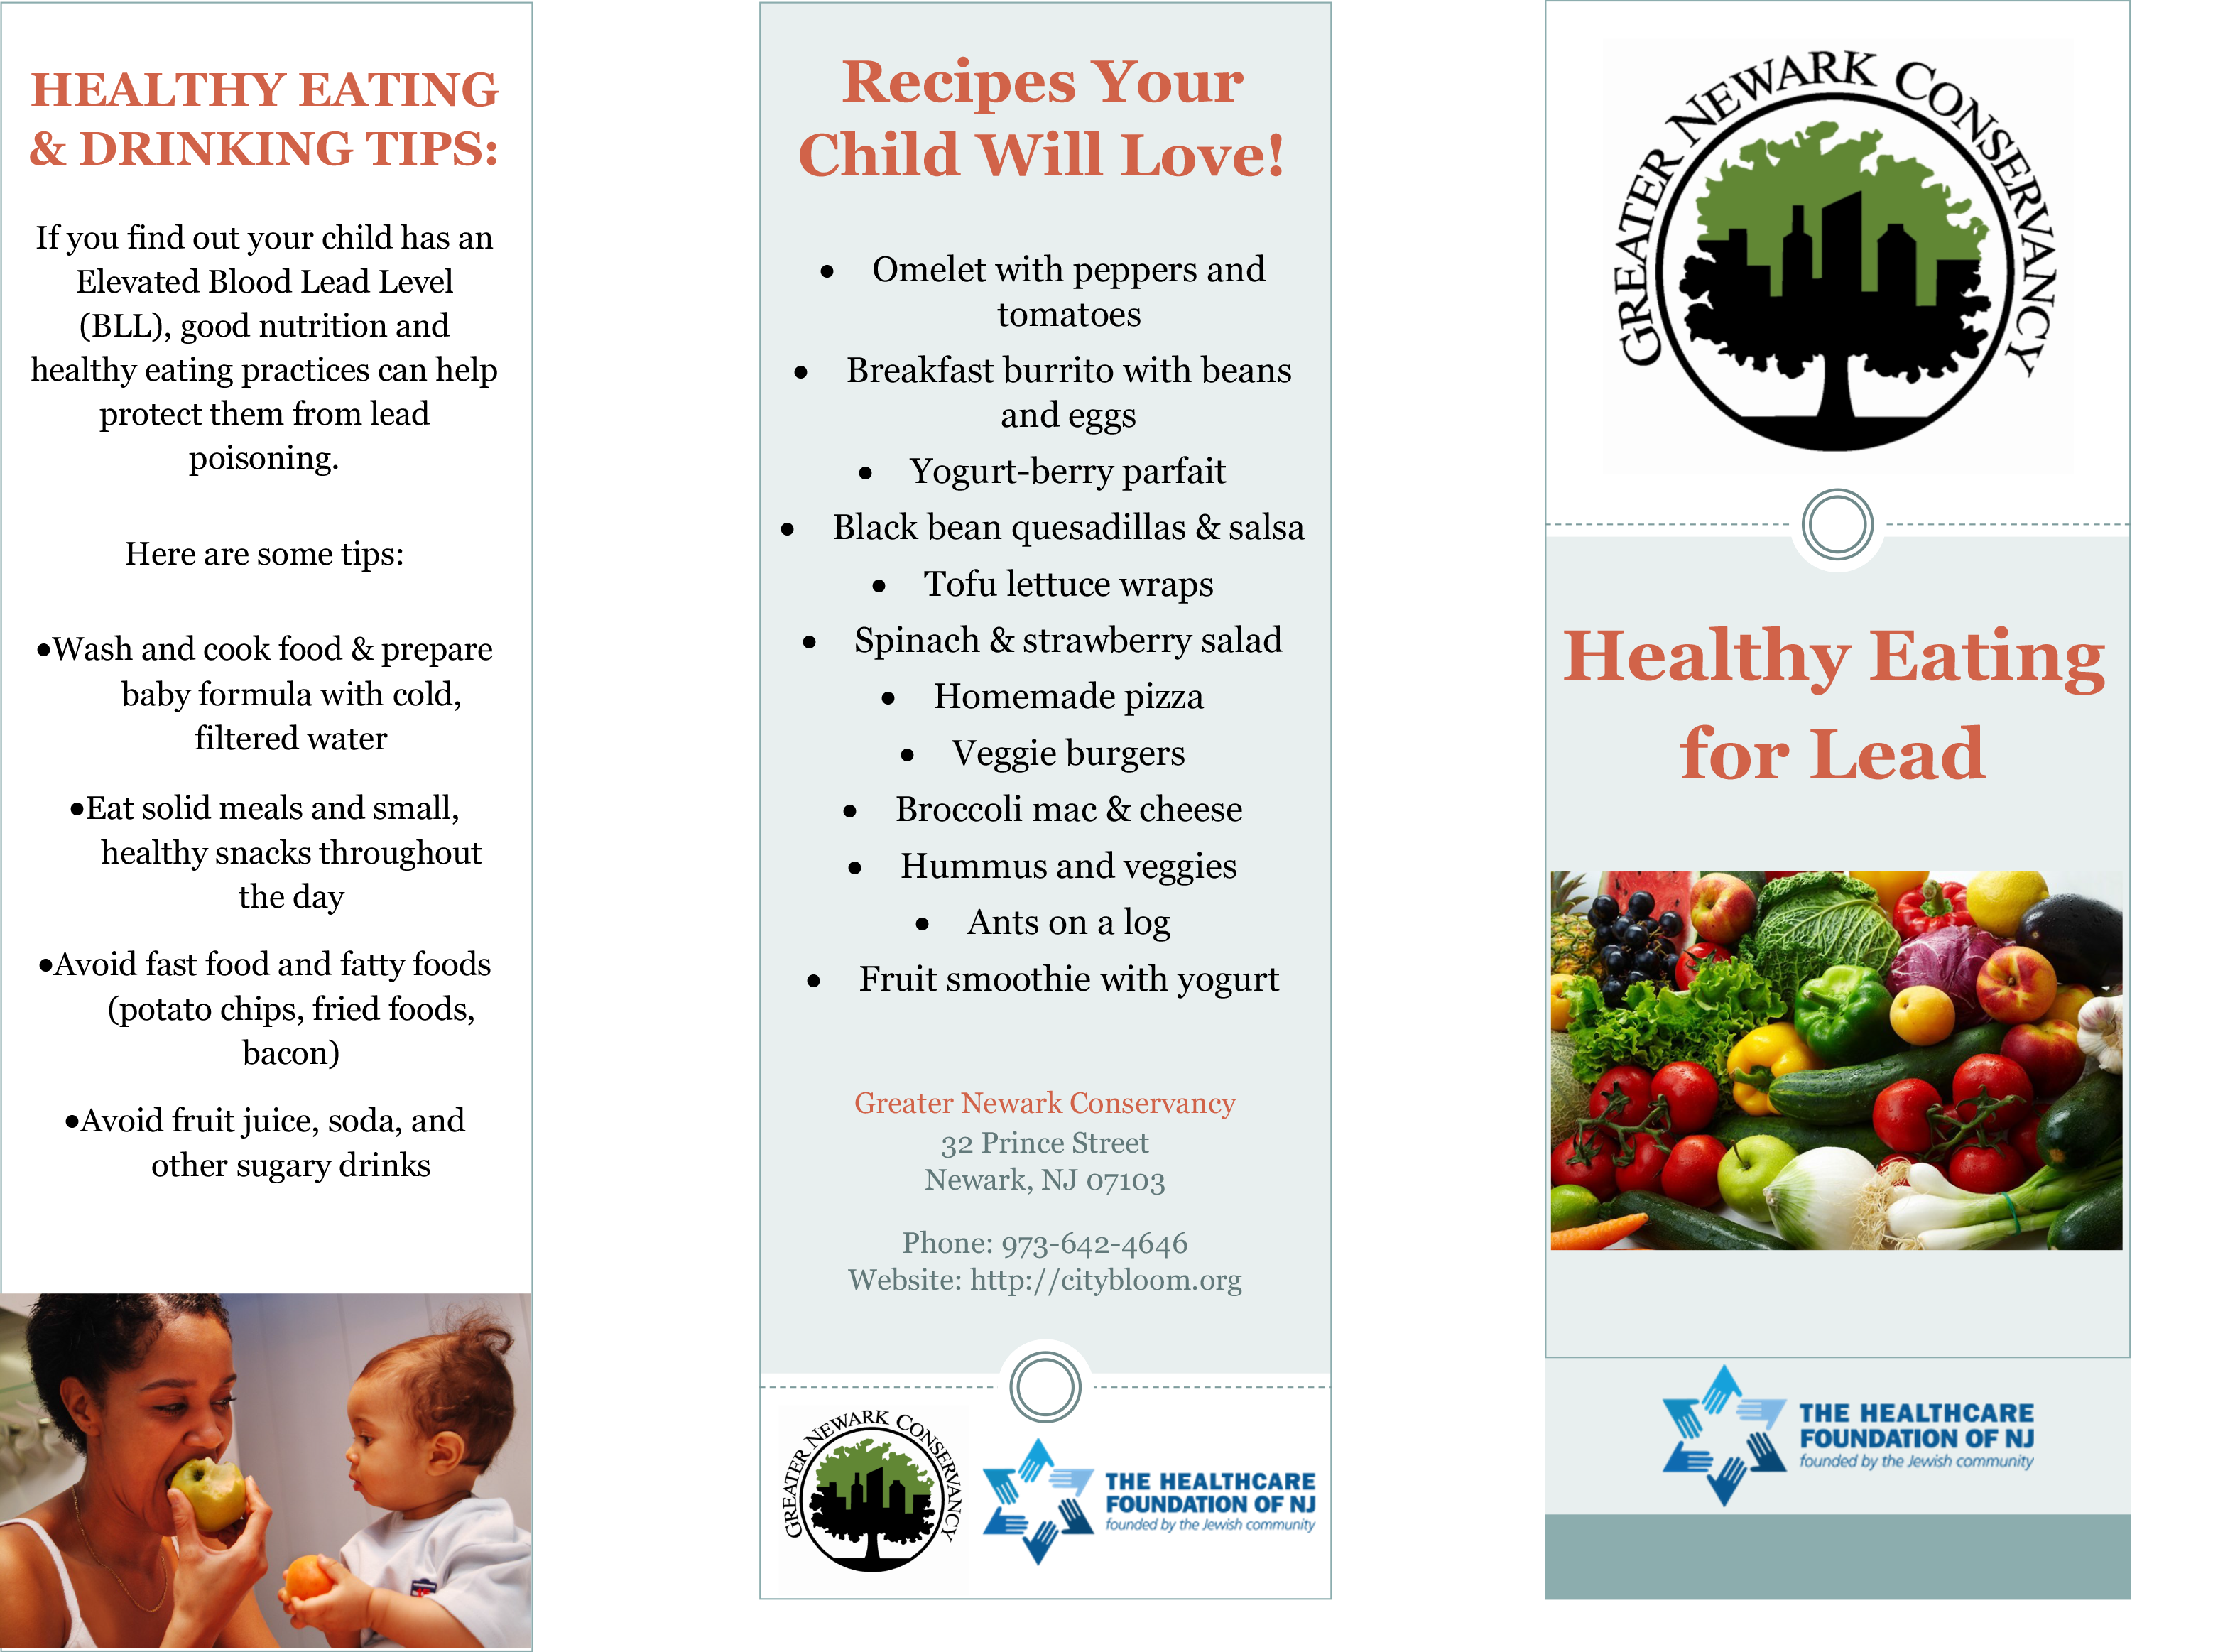 Healthy Eating for Lead